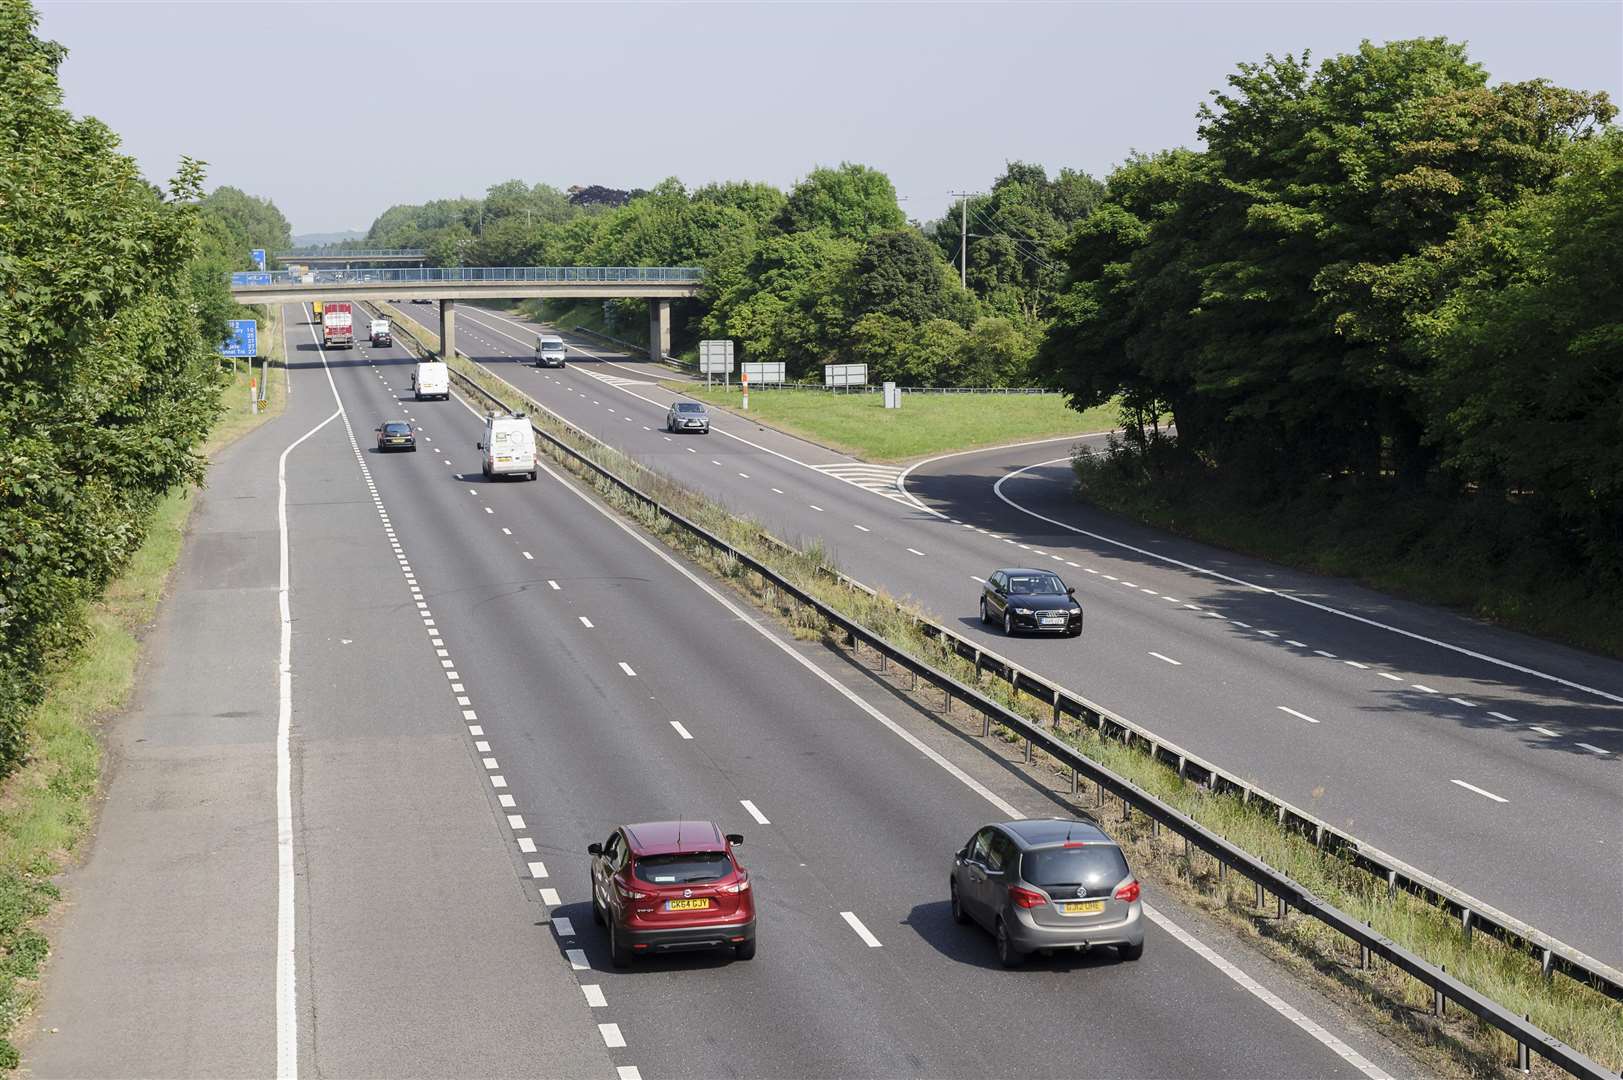 Views of the M2 Junction 6, for the A251 at Faversham